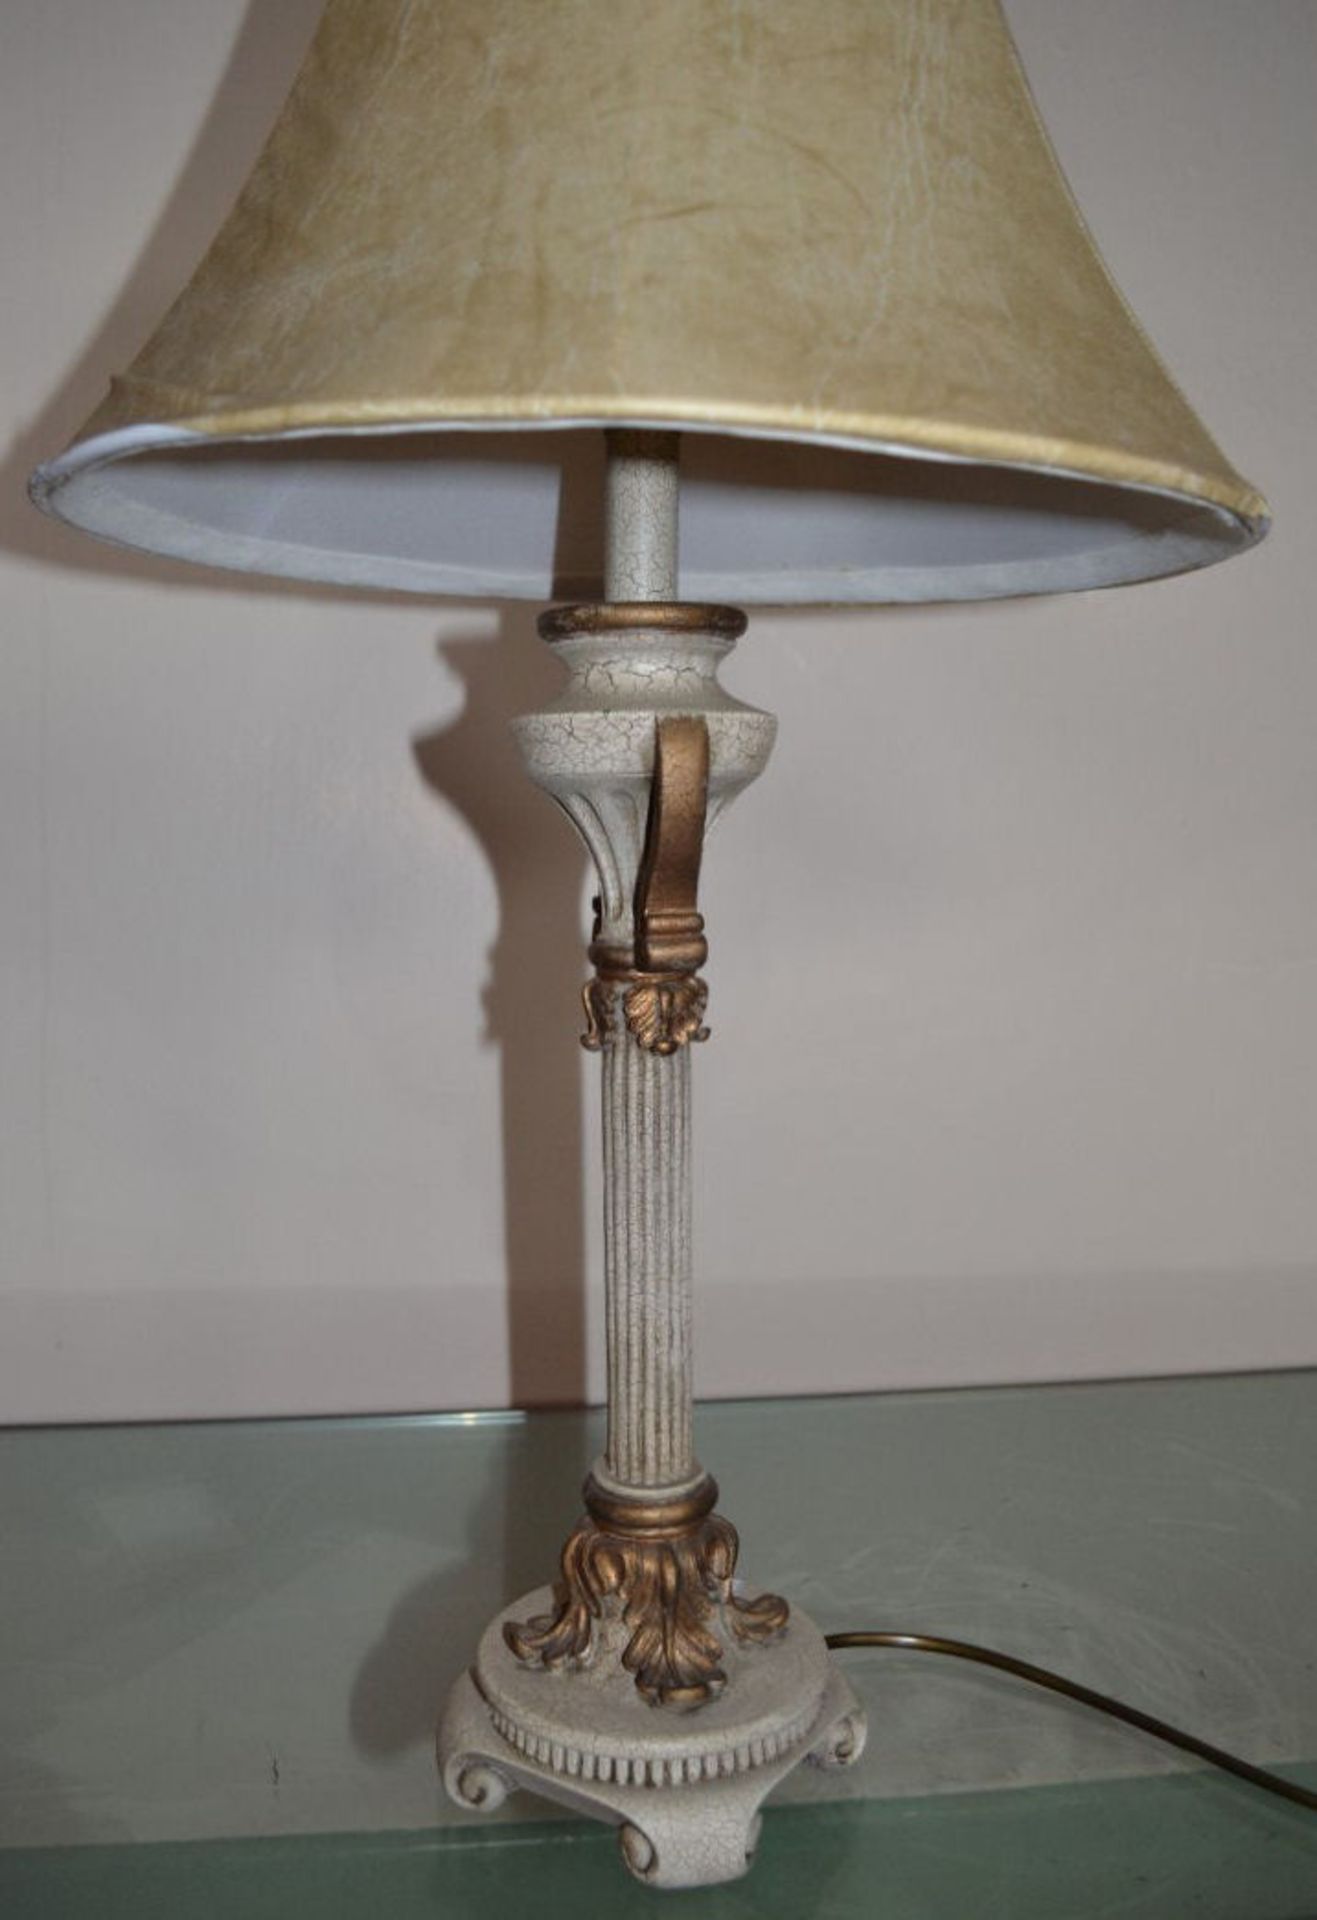 1 x Greek Column Style Lamp. 68.5cm Tall. Base Is 12.5cm Square. Lampshade Diameter 35cm. - Image 3 of 5